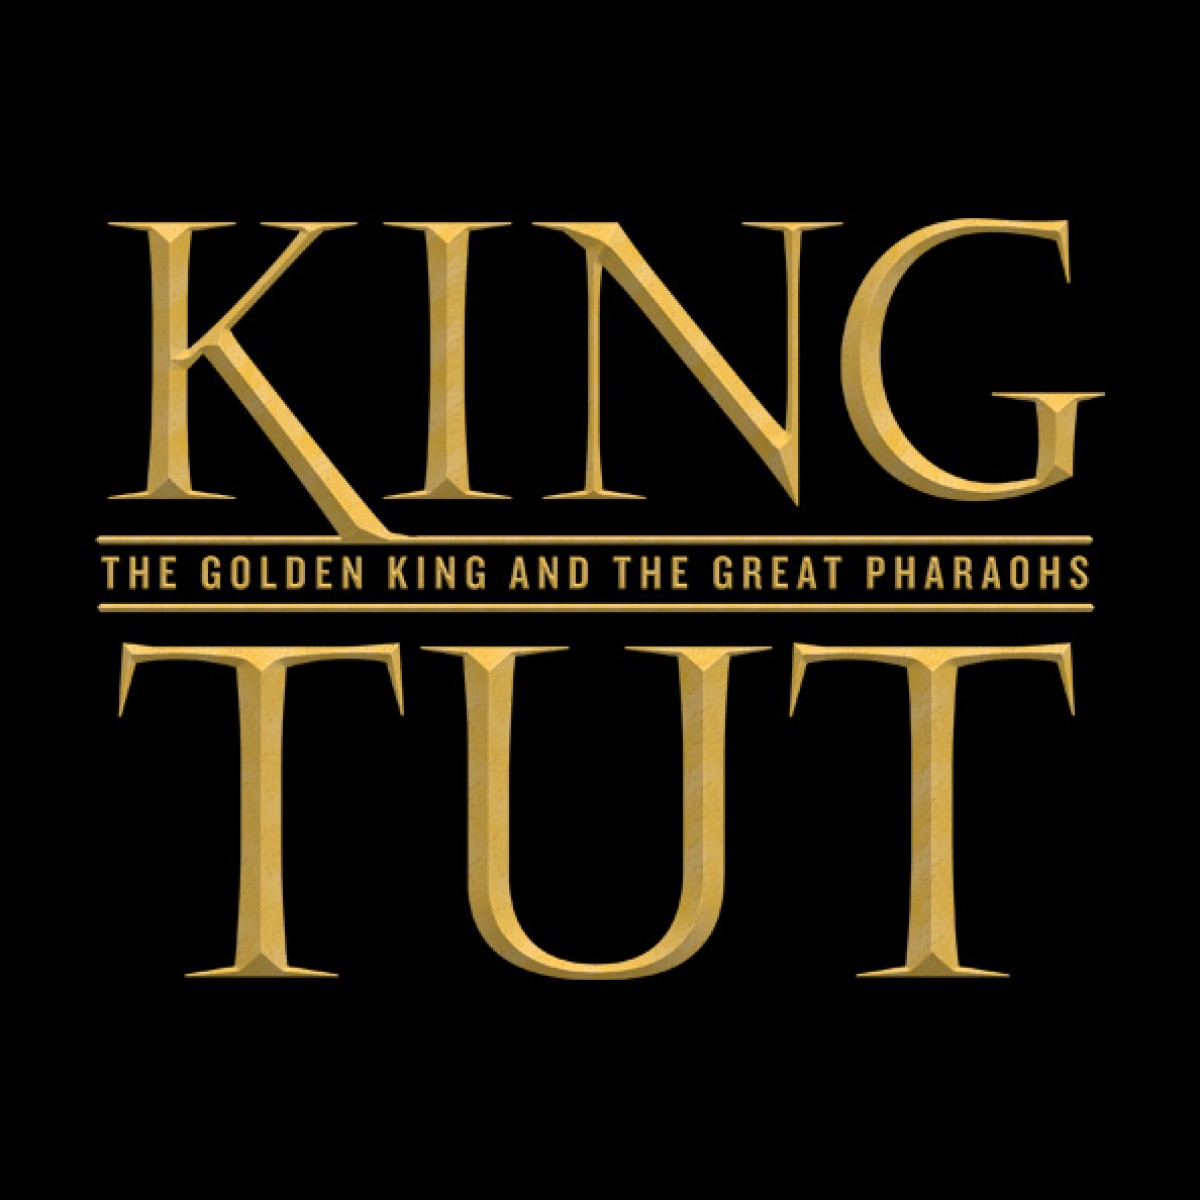 King Tut: The Golden King and the Great Pharaohs Exhibit